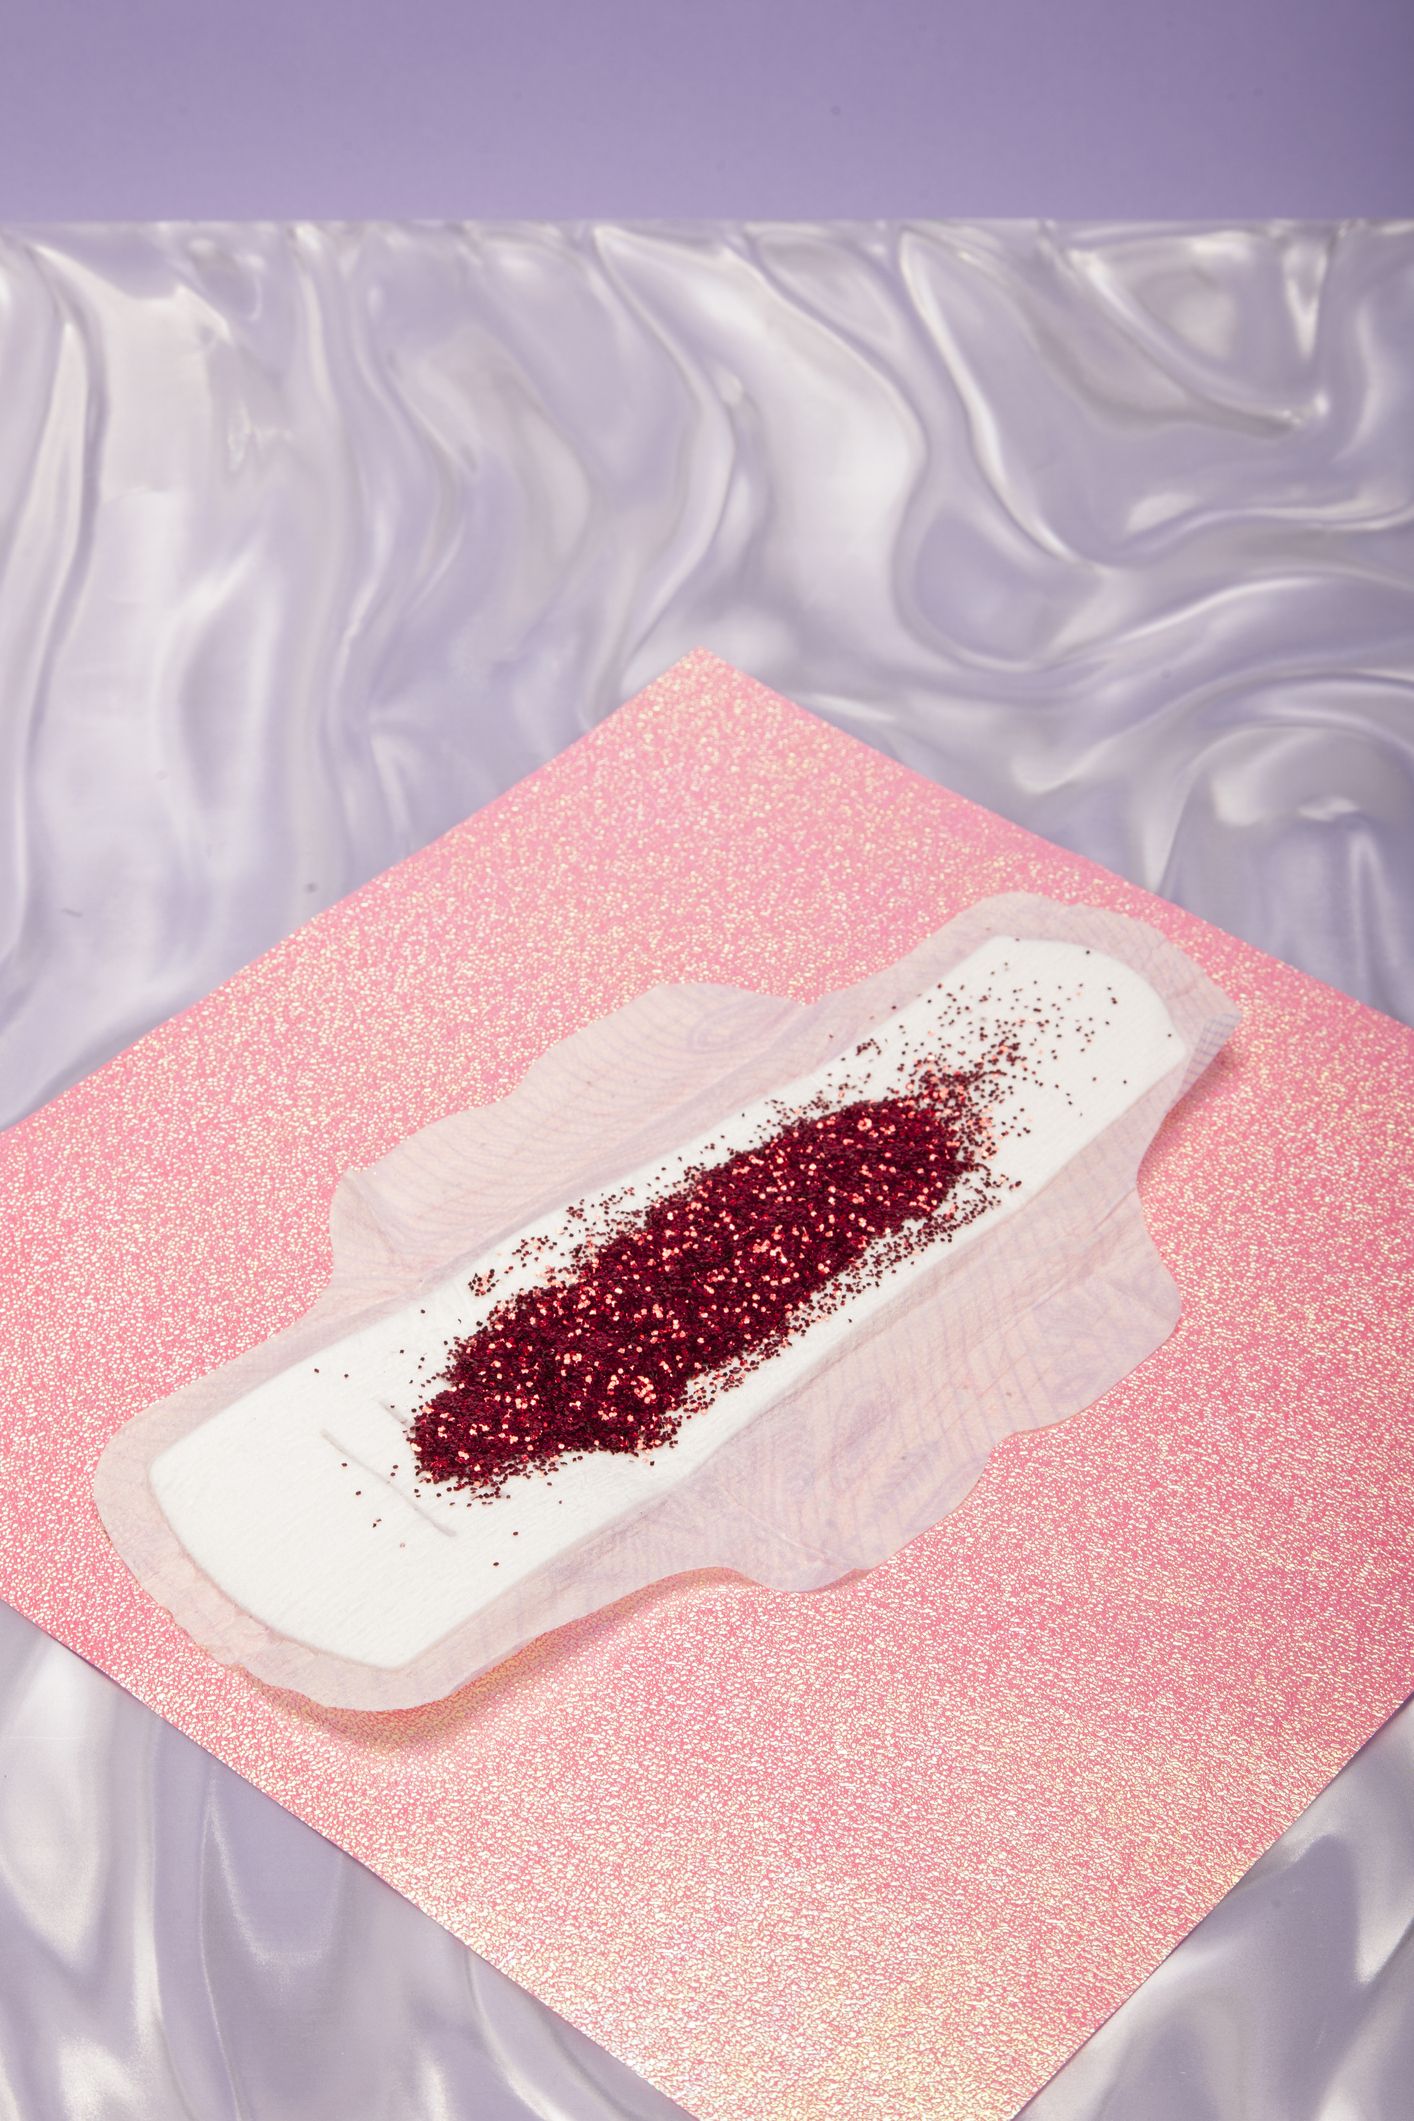 11 things you NEED to know about period pic